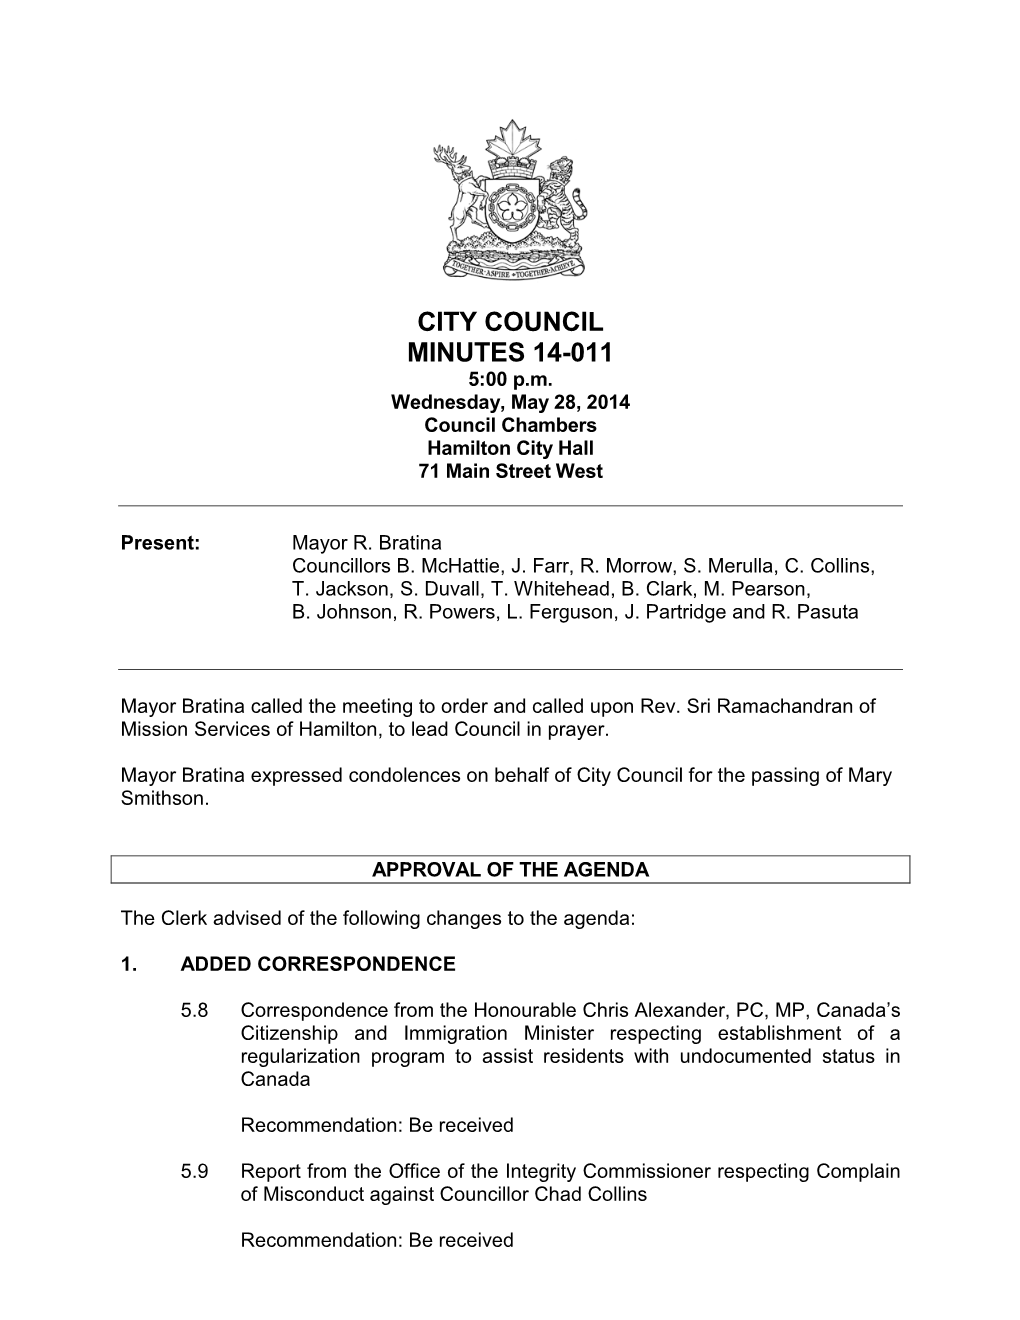 May 28, 2014 Council Minutes 14-011 Including